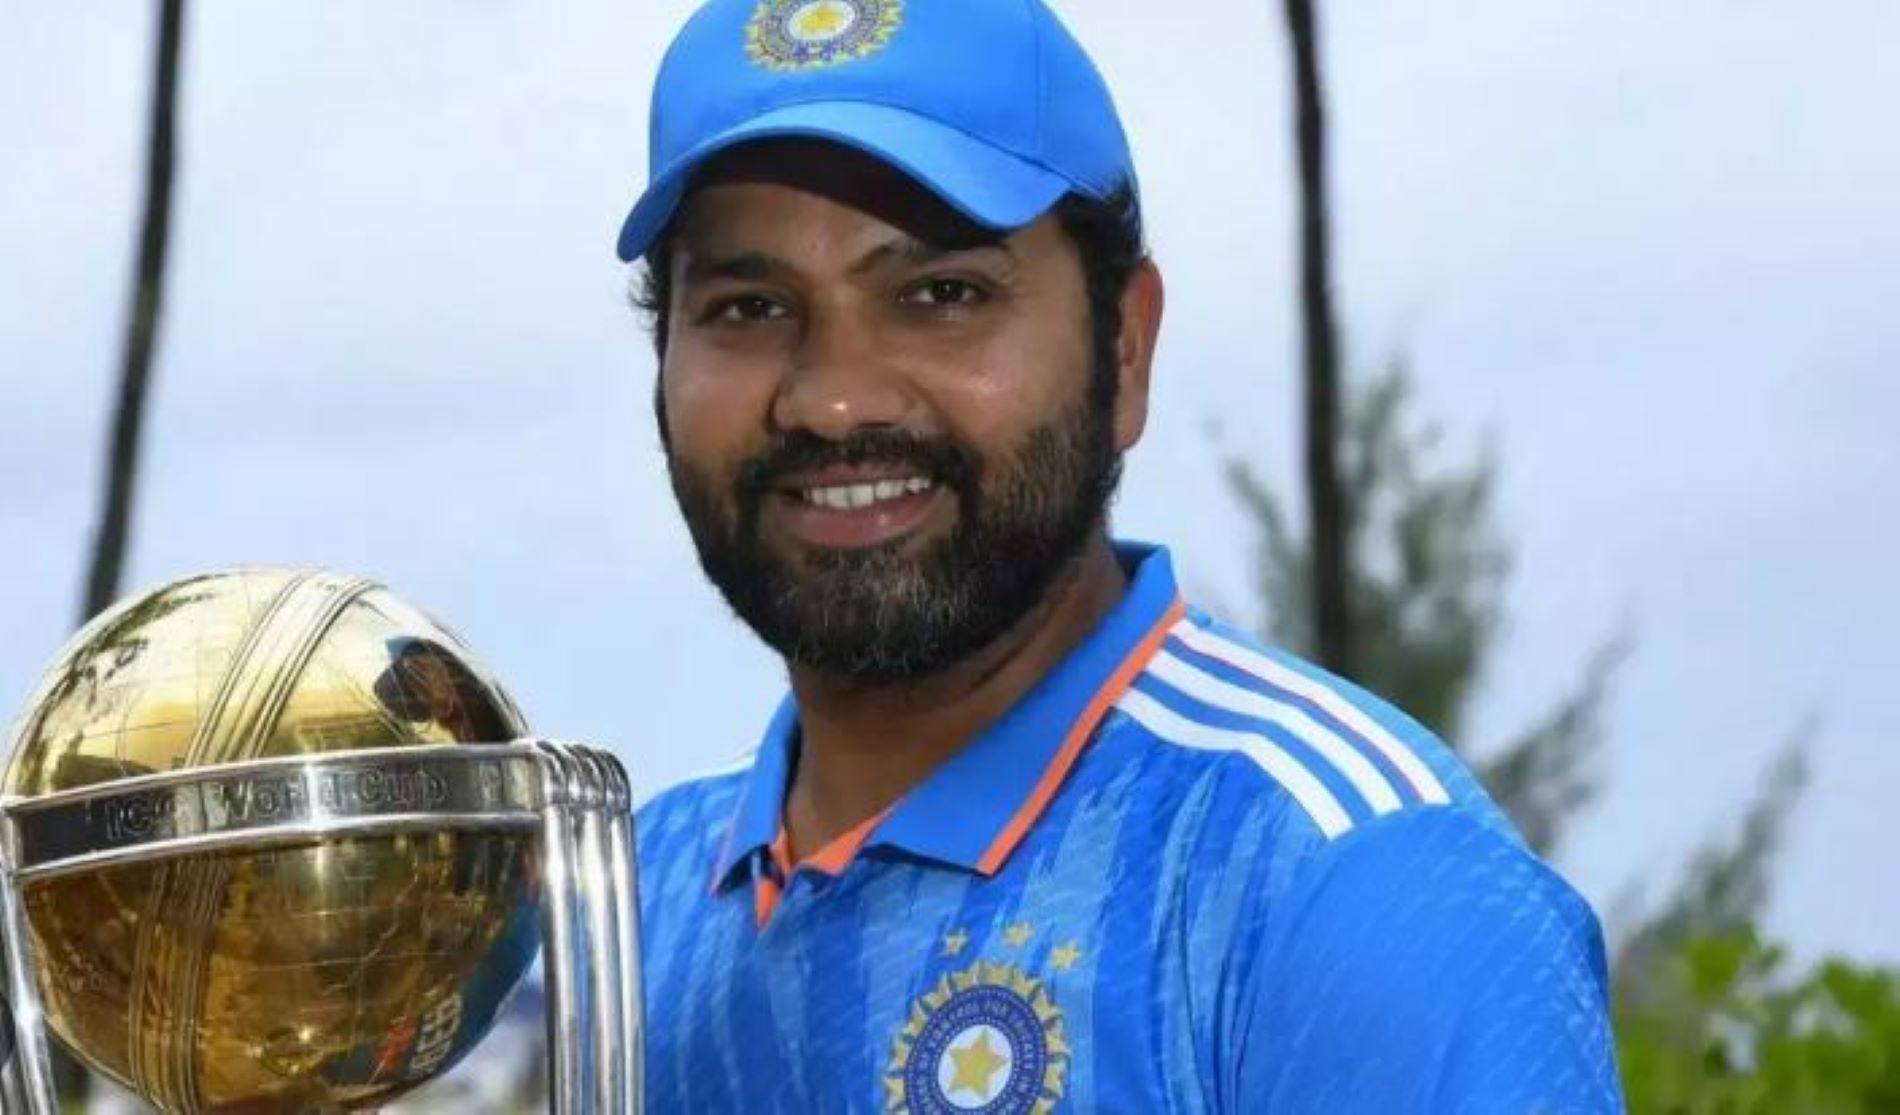 Rohit Sharma will hope to hold the trophy at the end of the 2023 World Cup.